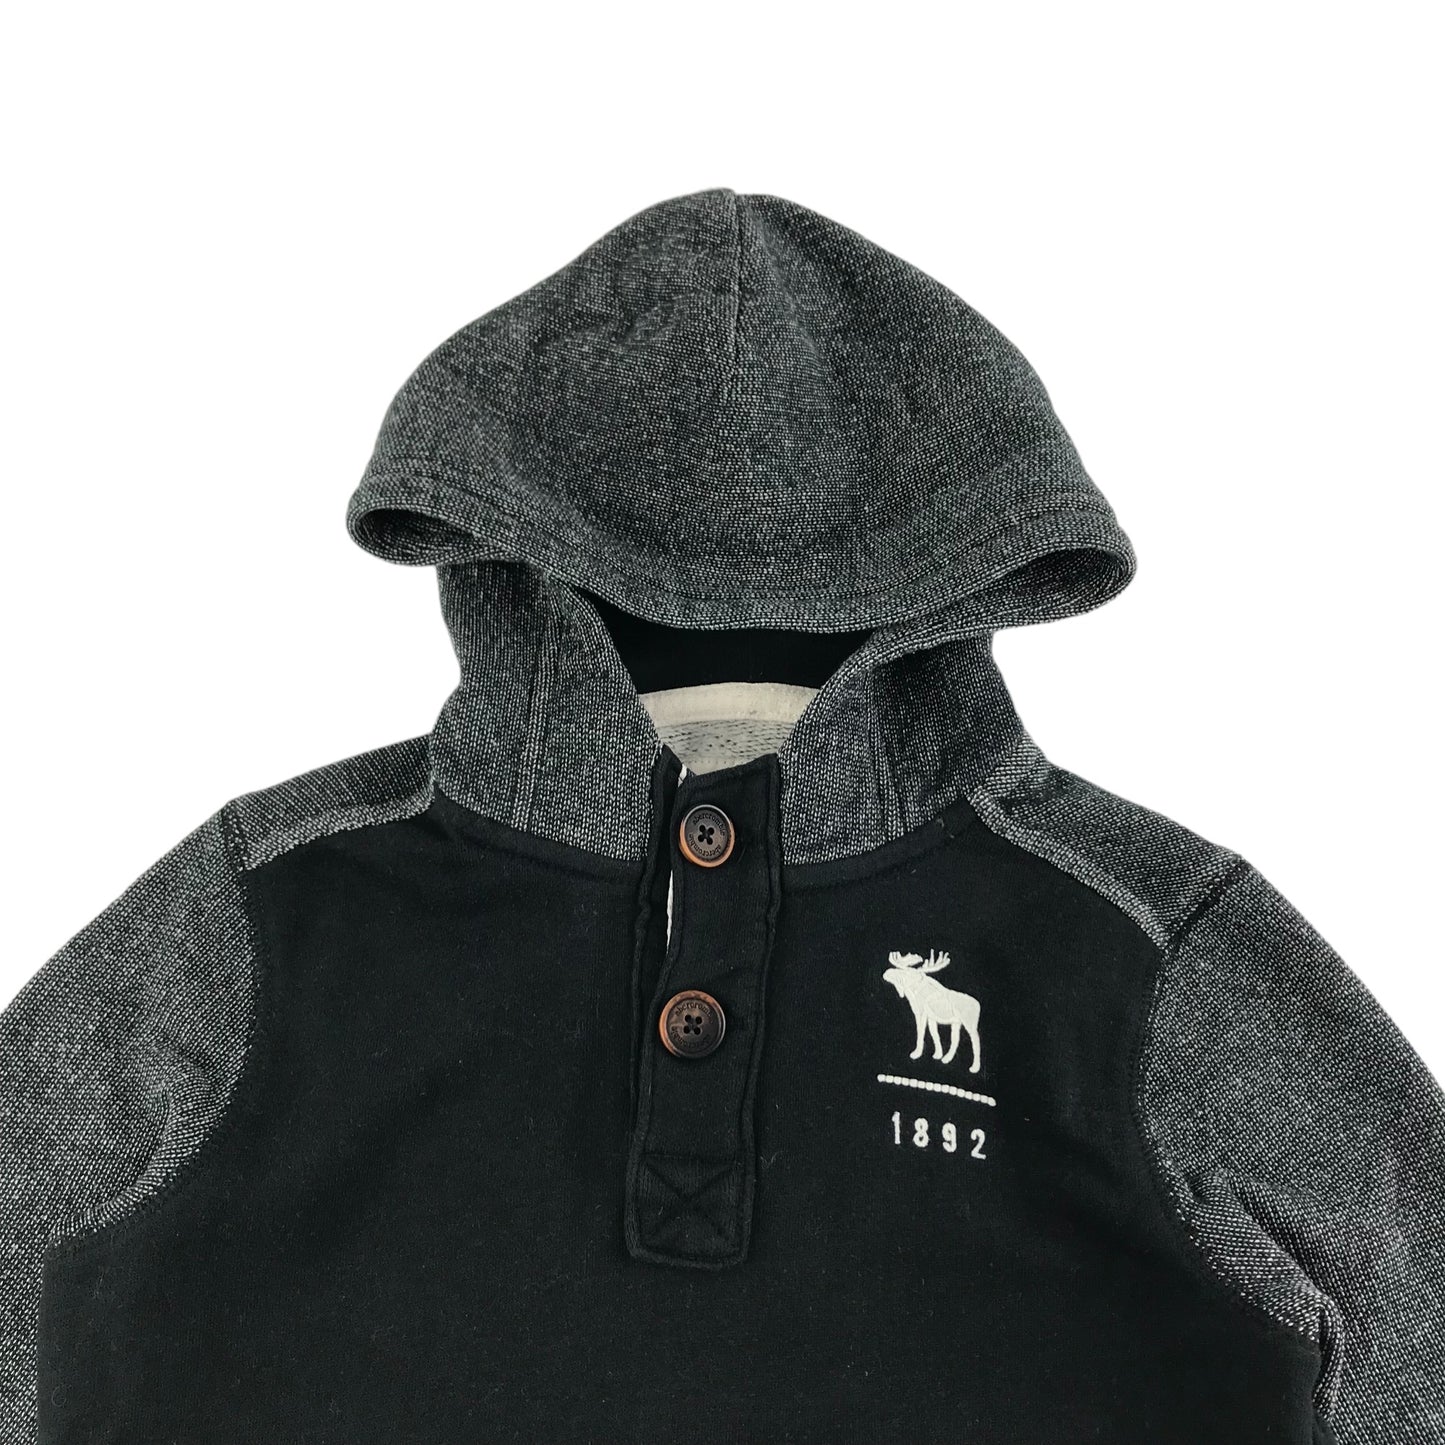 Abercrombie Hoodie Age 7 Black and Grey Panelled Pullover with button up neck